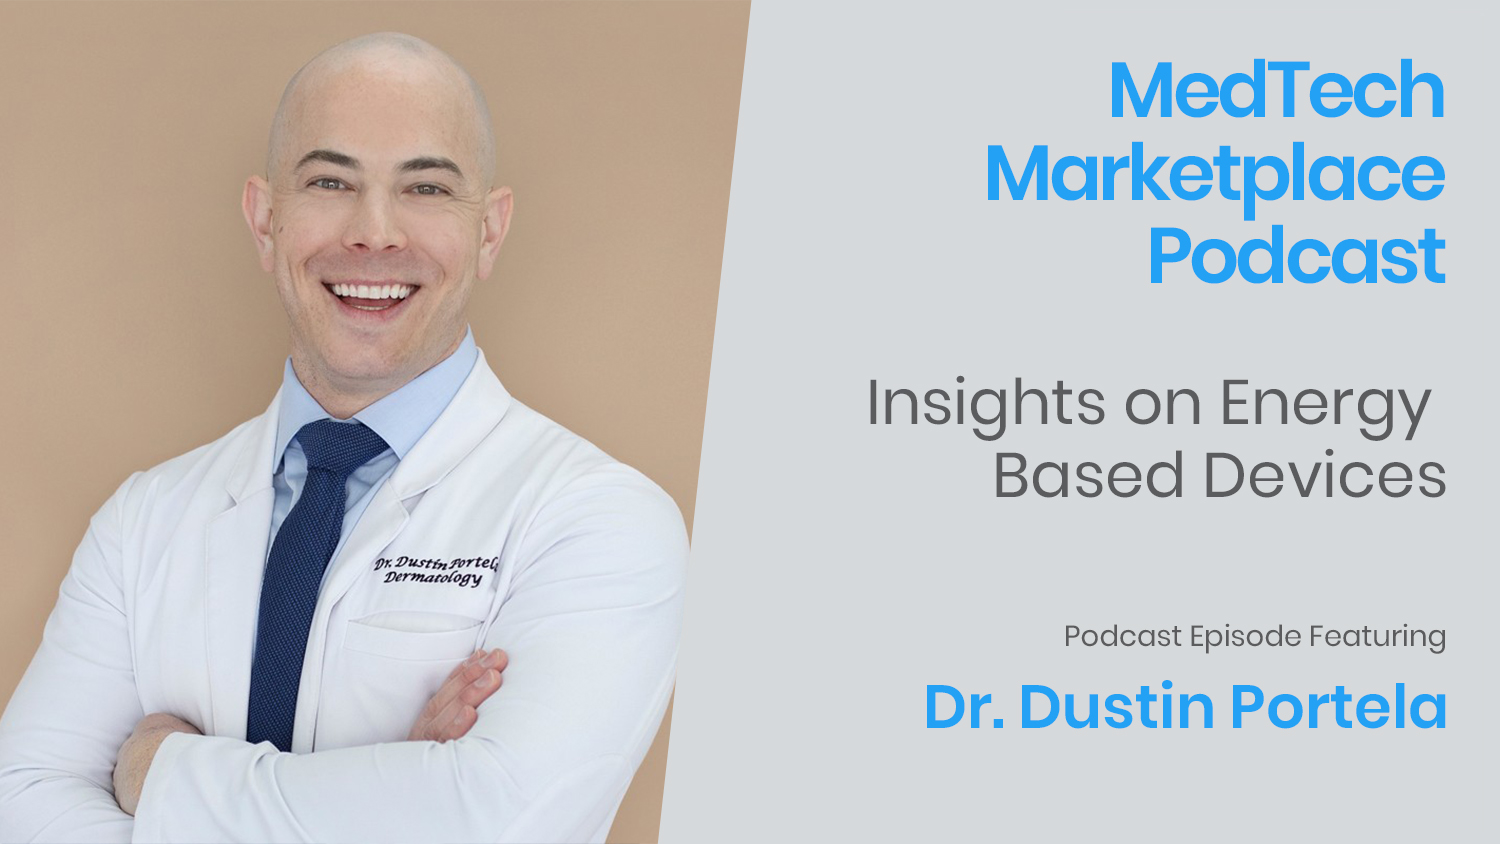 MedTech Marketplace Podcast featuring Dr. Dustin Portela 